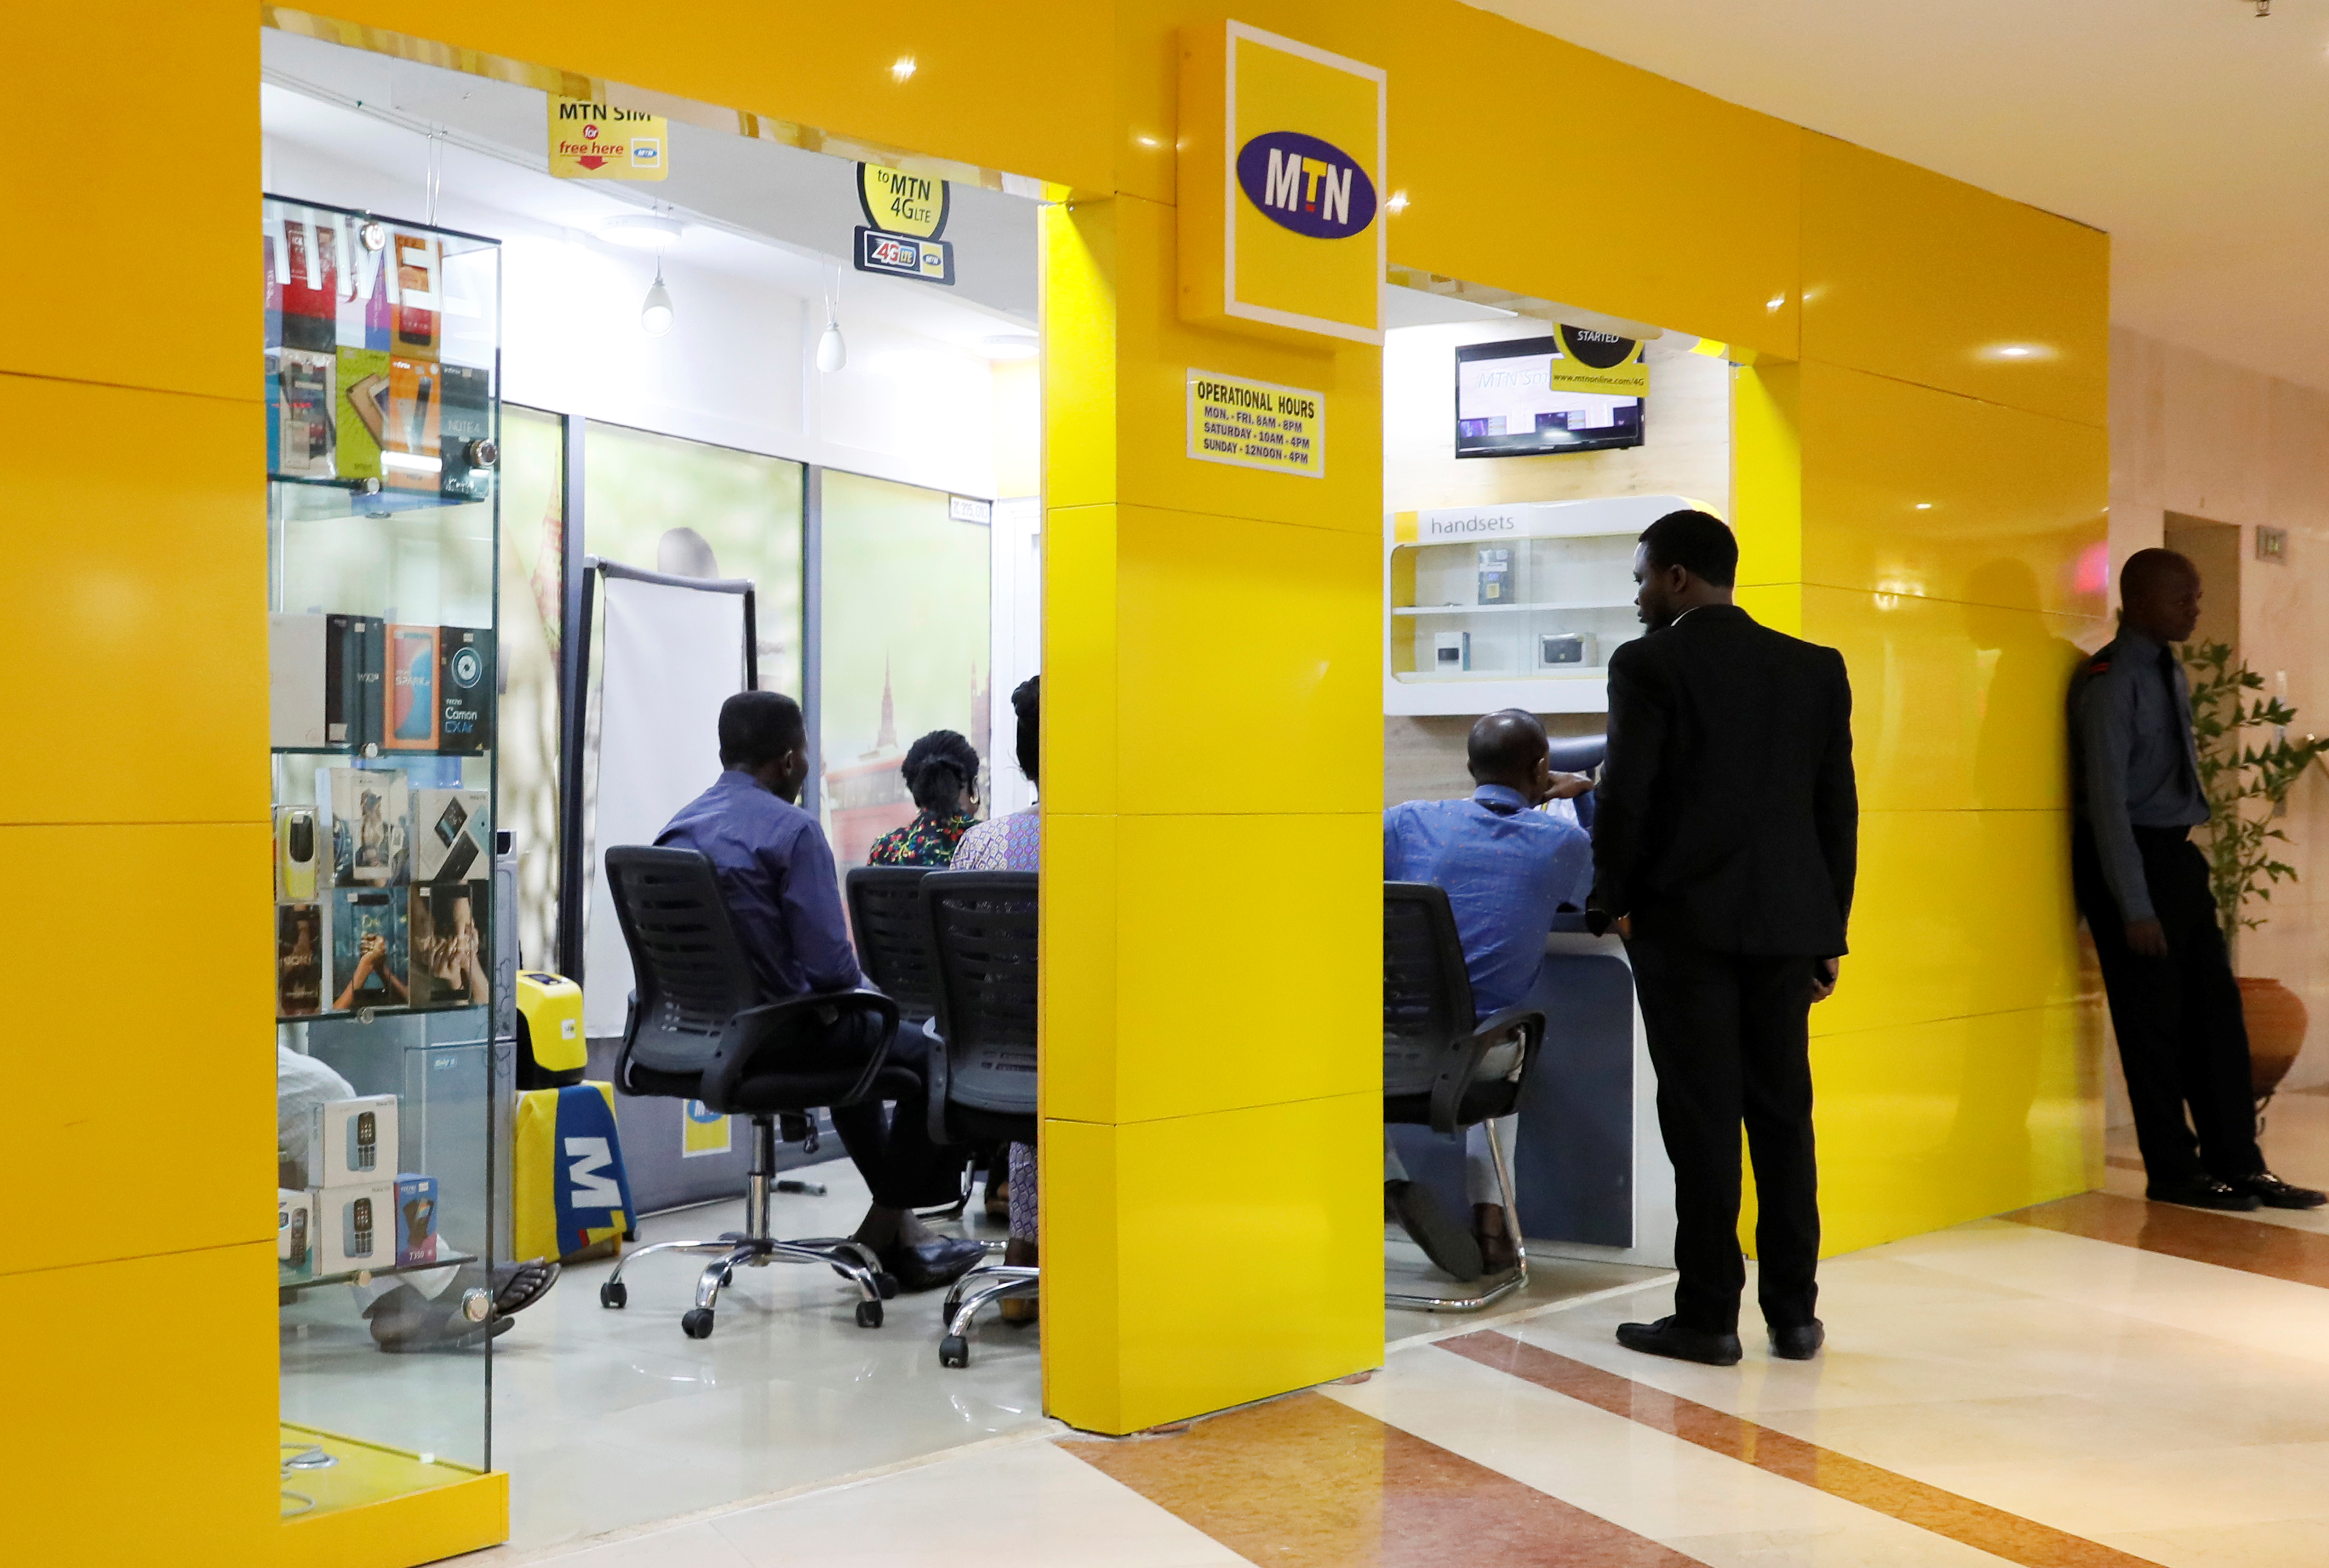 Customers are pictured inside an MTN dealer shop in Abuja, Nigeria September 11, 2018. REUTERS/Afolabi Sotunde